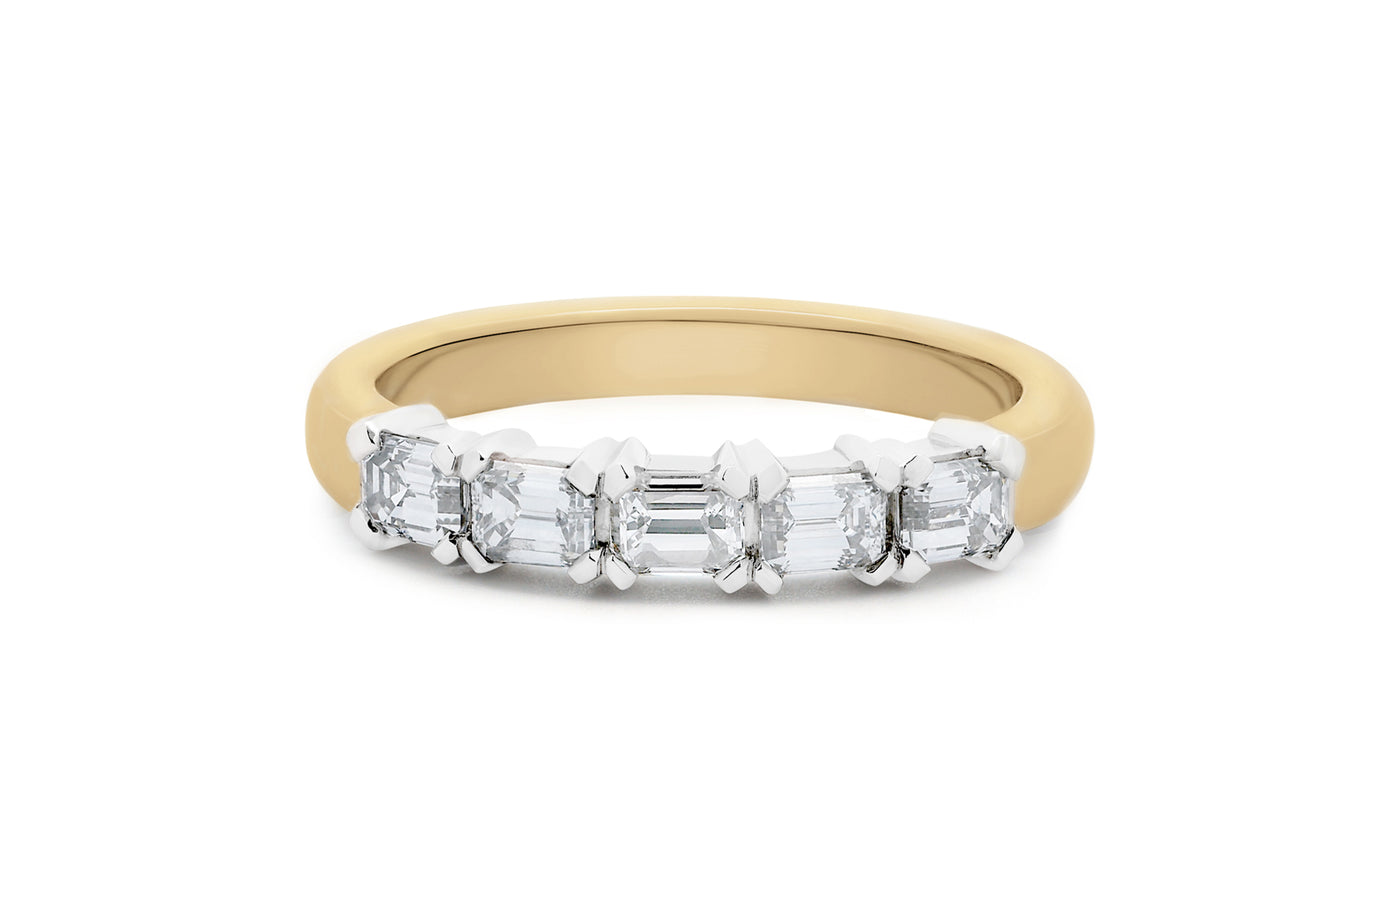 Emerald Cut Diamond Claw Set Ring in 18ct yellow gold and platinum.